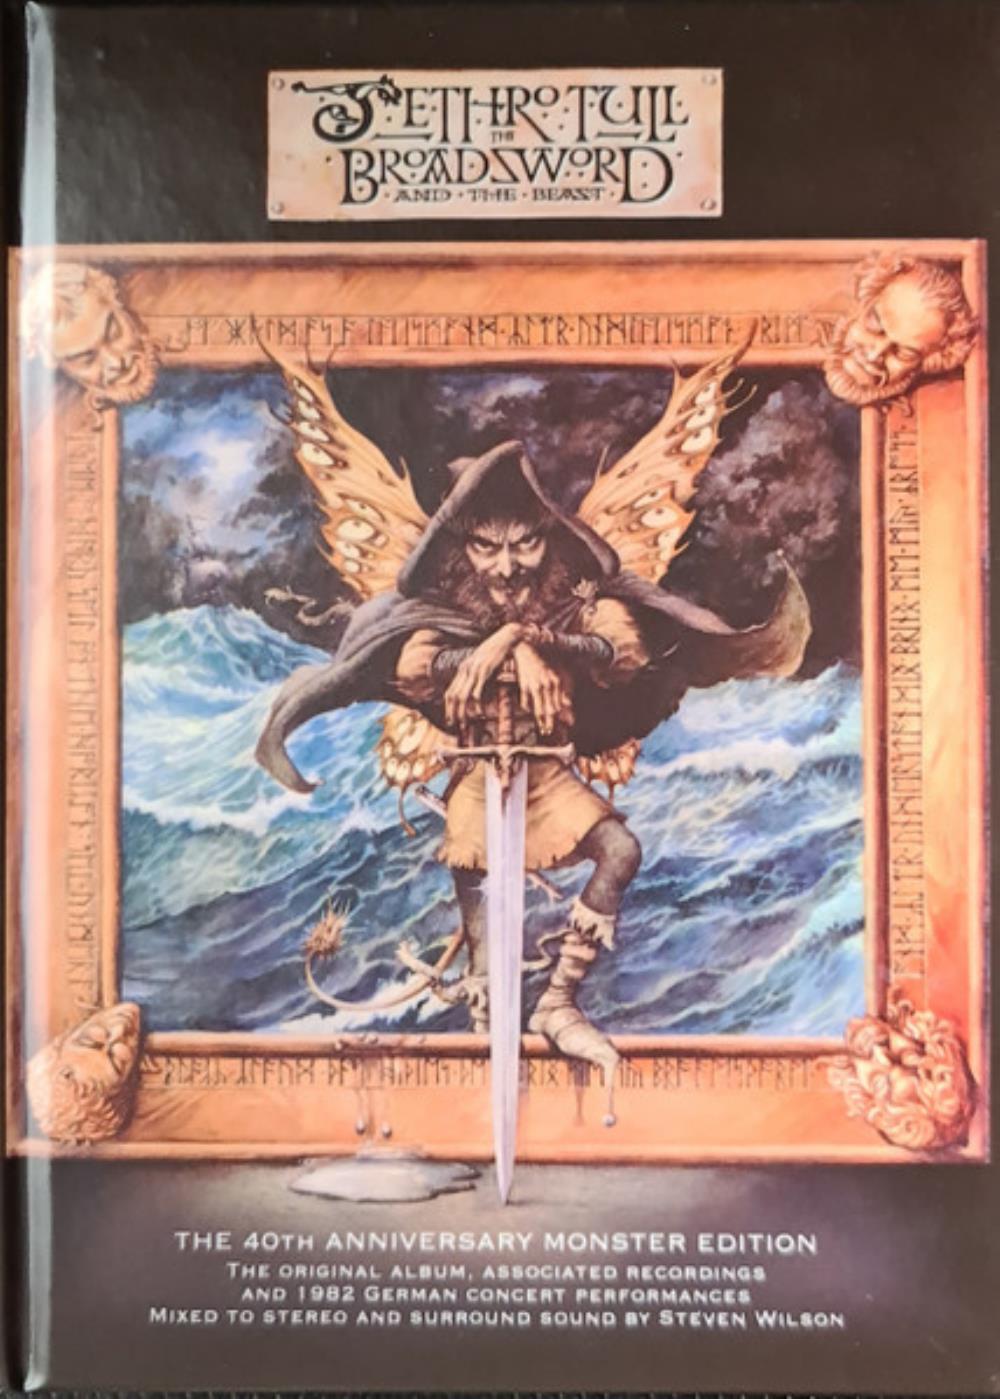  The Broadsword And The Beast (The 40th Anniversary Monster Edition) by JETHRO TULL album cover